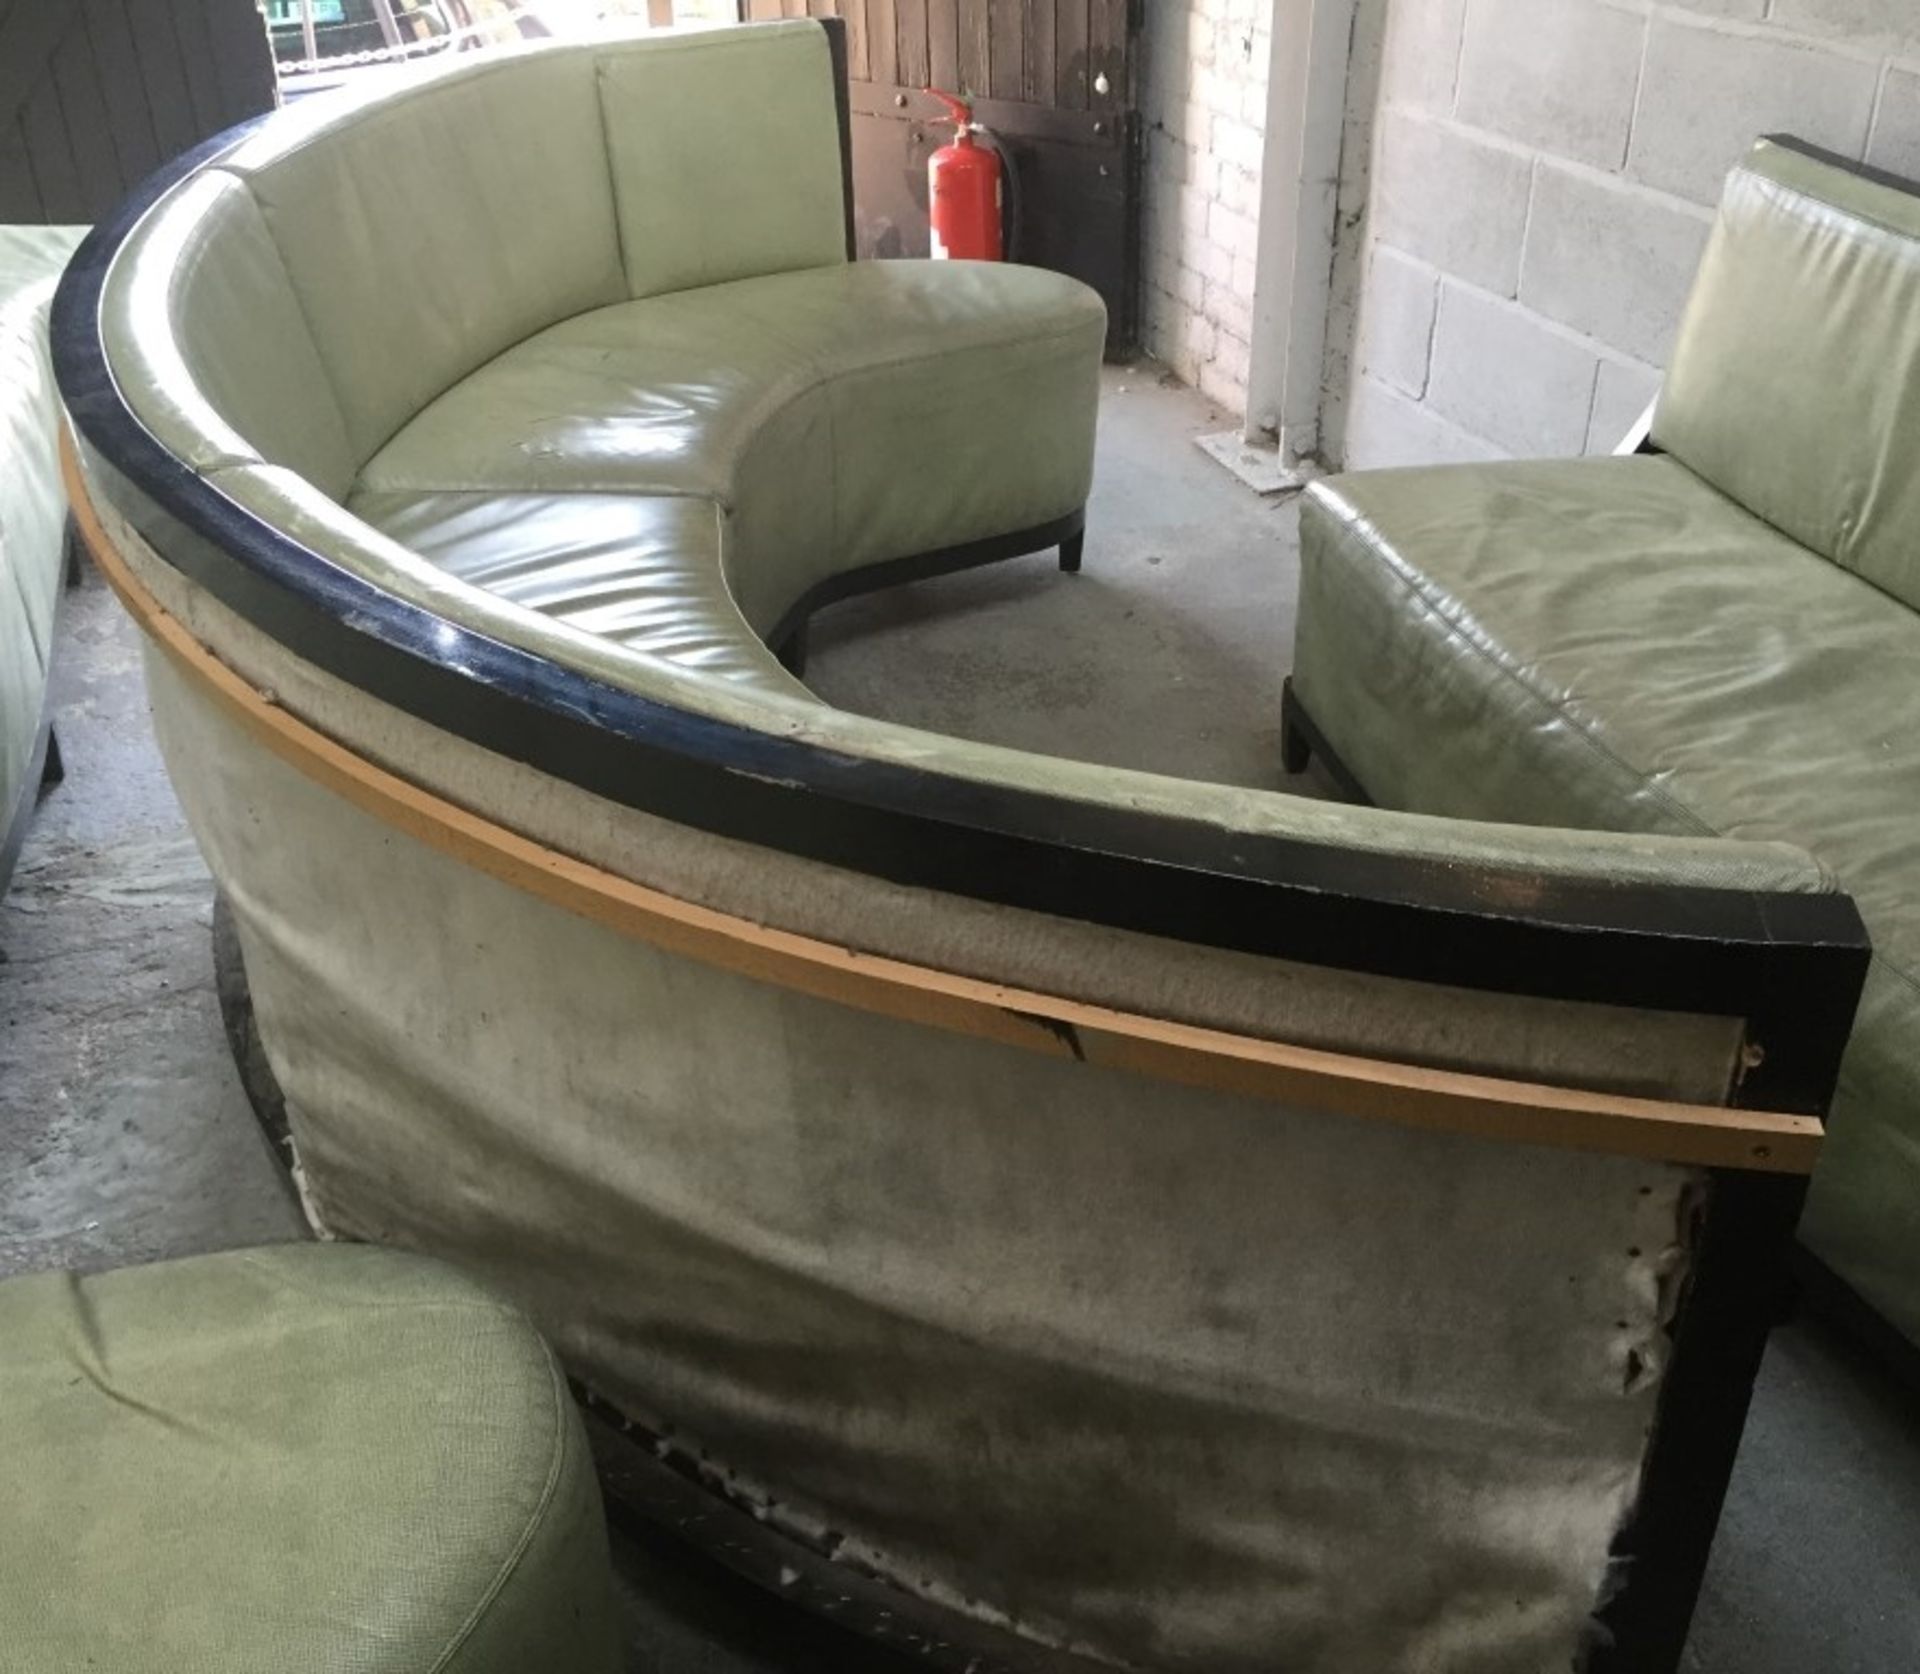 1 x Luxury Upholstered Curved Seating Area - Recently Removed From Nobu - Dimensions: W285 x D62cm x - Image 8 of 23